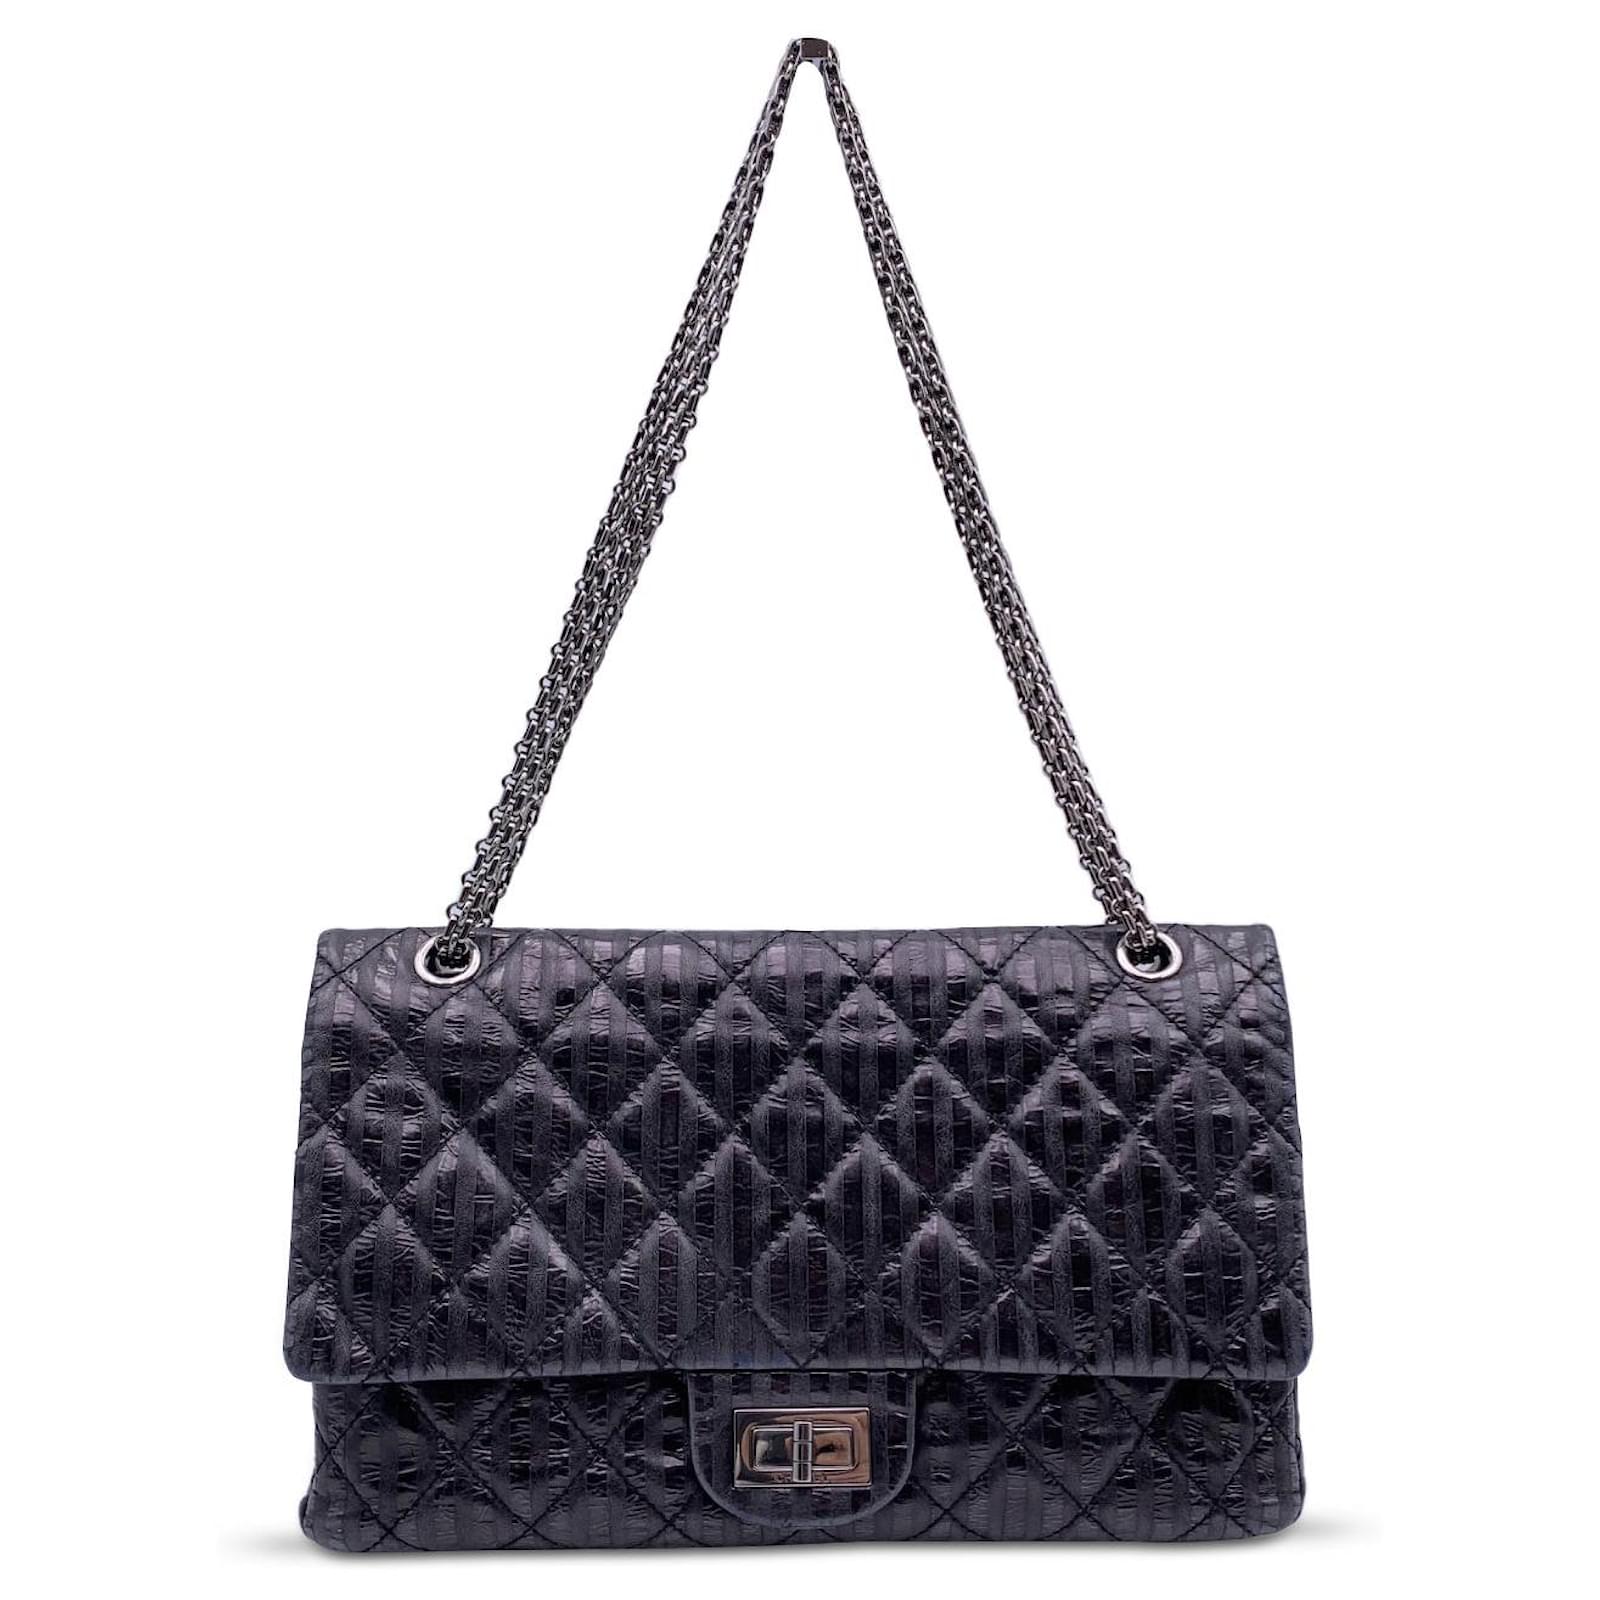 Chanel Black Quilted Metallic Leather Striped 2.55 REISSUE FLAP BAG ref ...